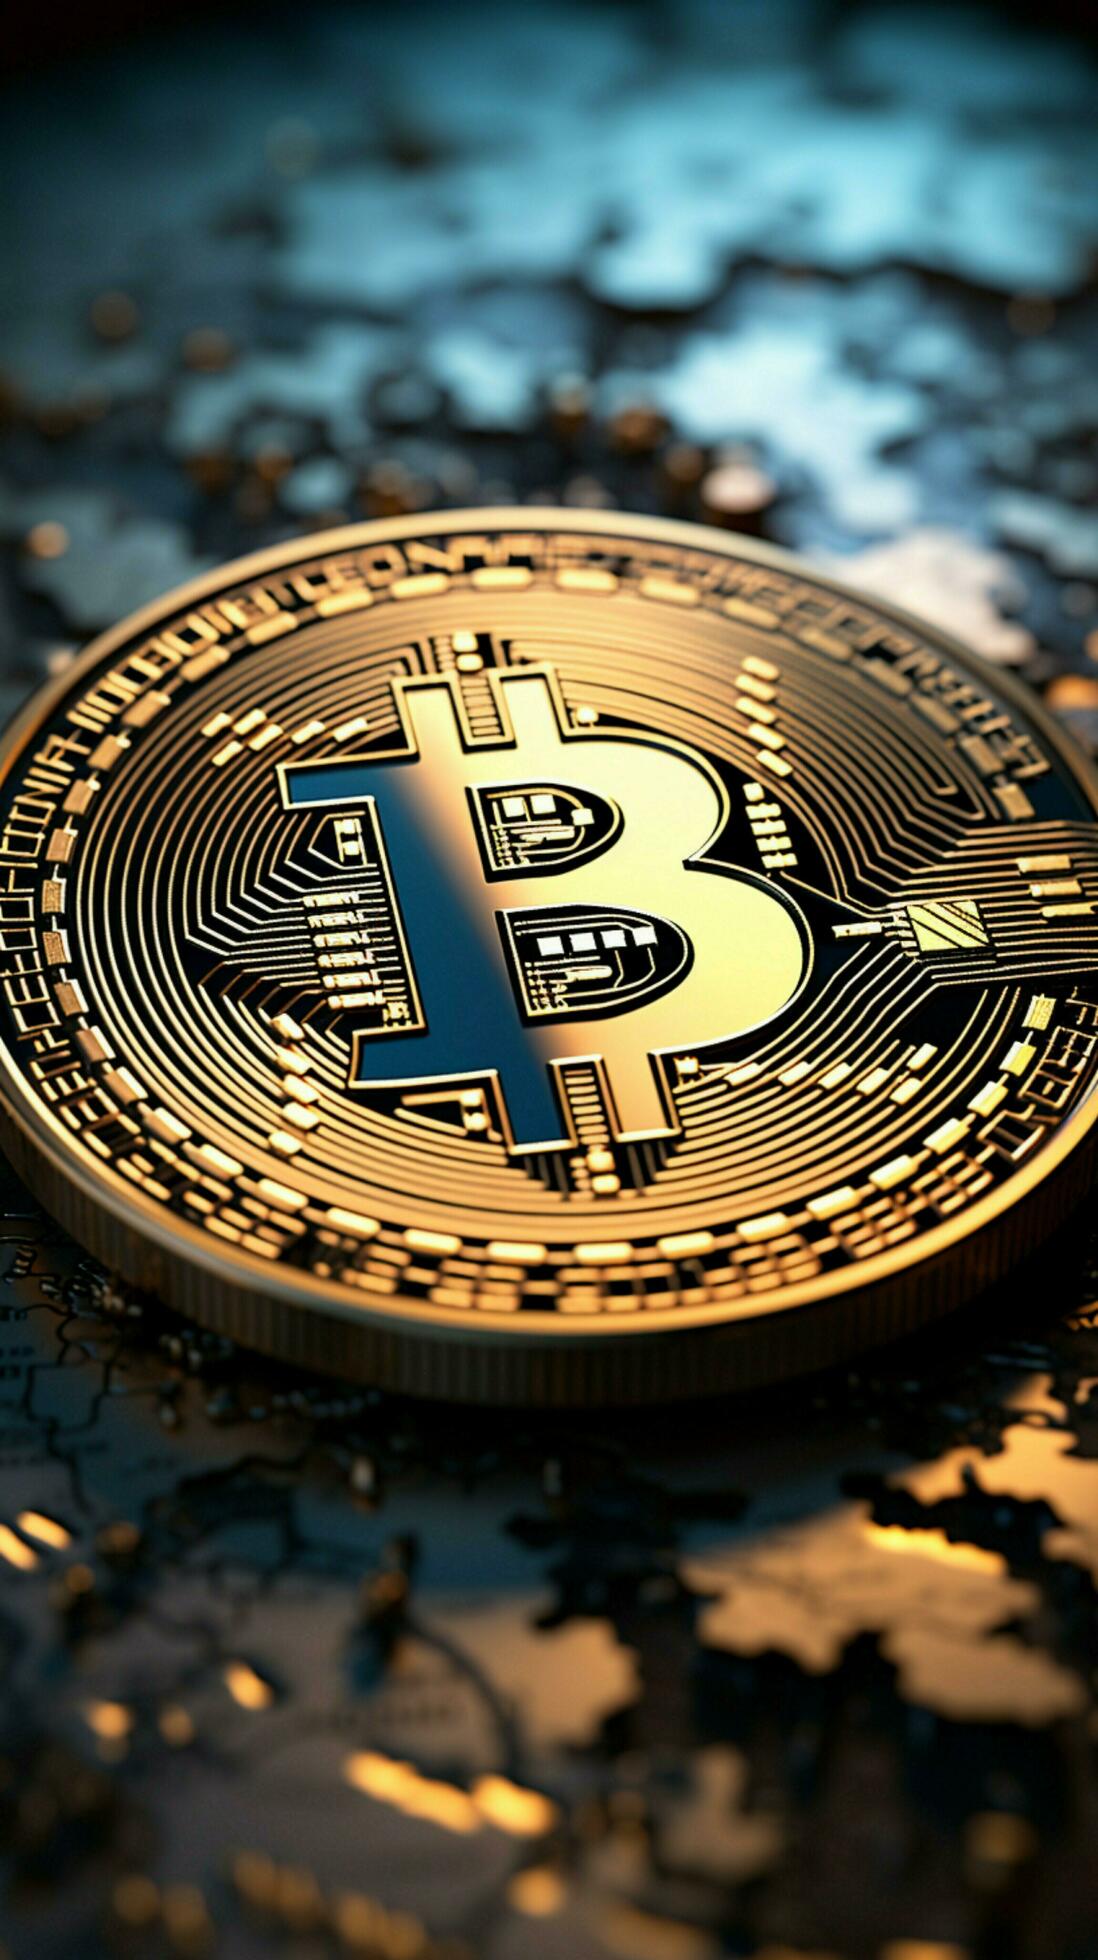 21, Cryptocurrency Wallpaper Royalty-Free Photos and Stock Images | Shutterstock